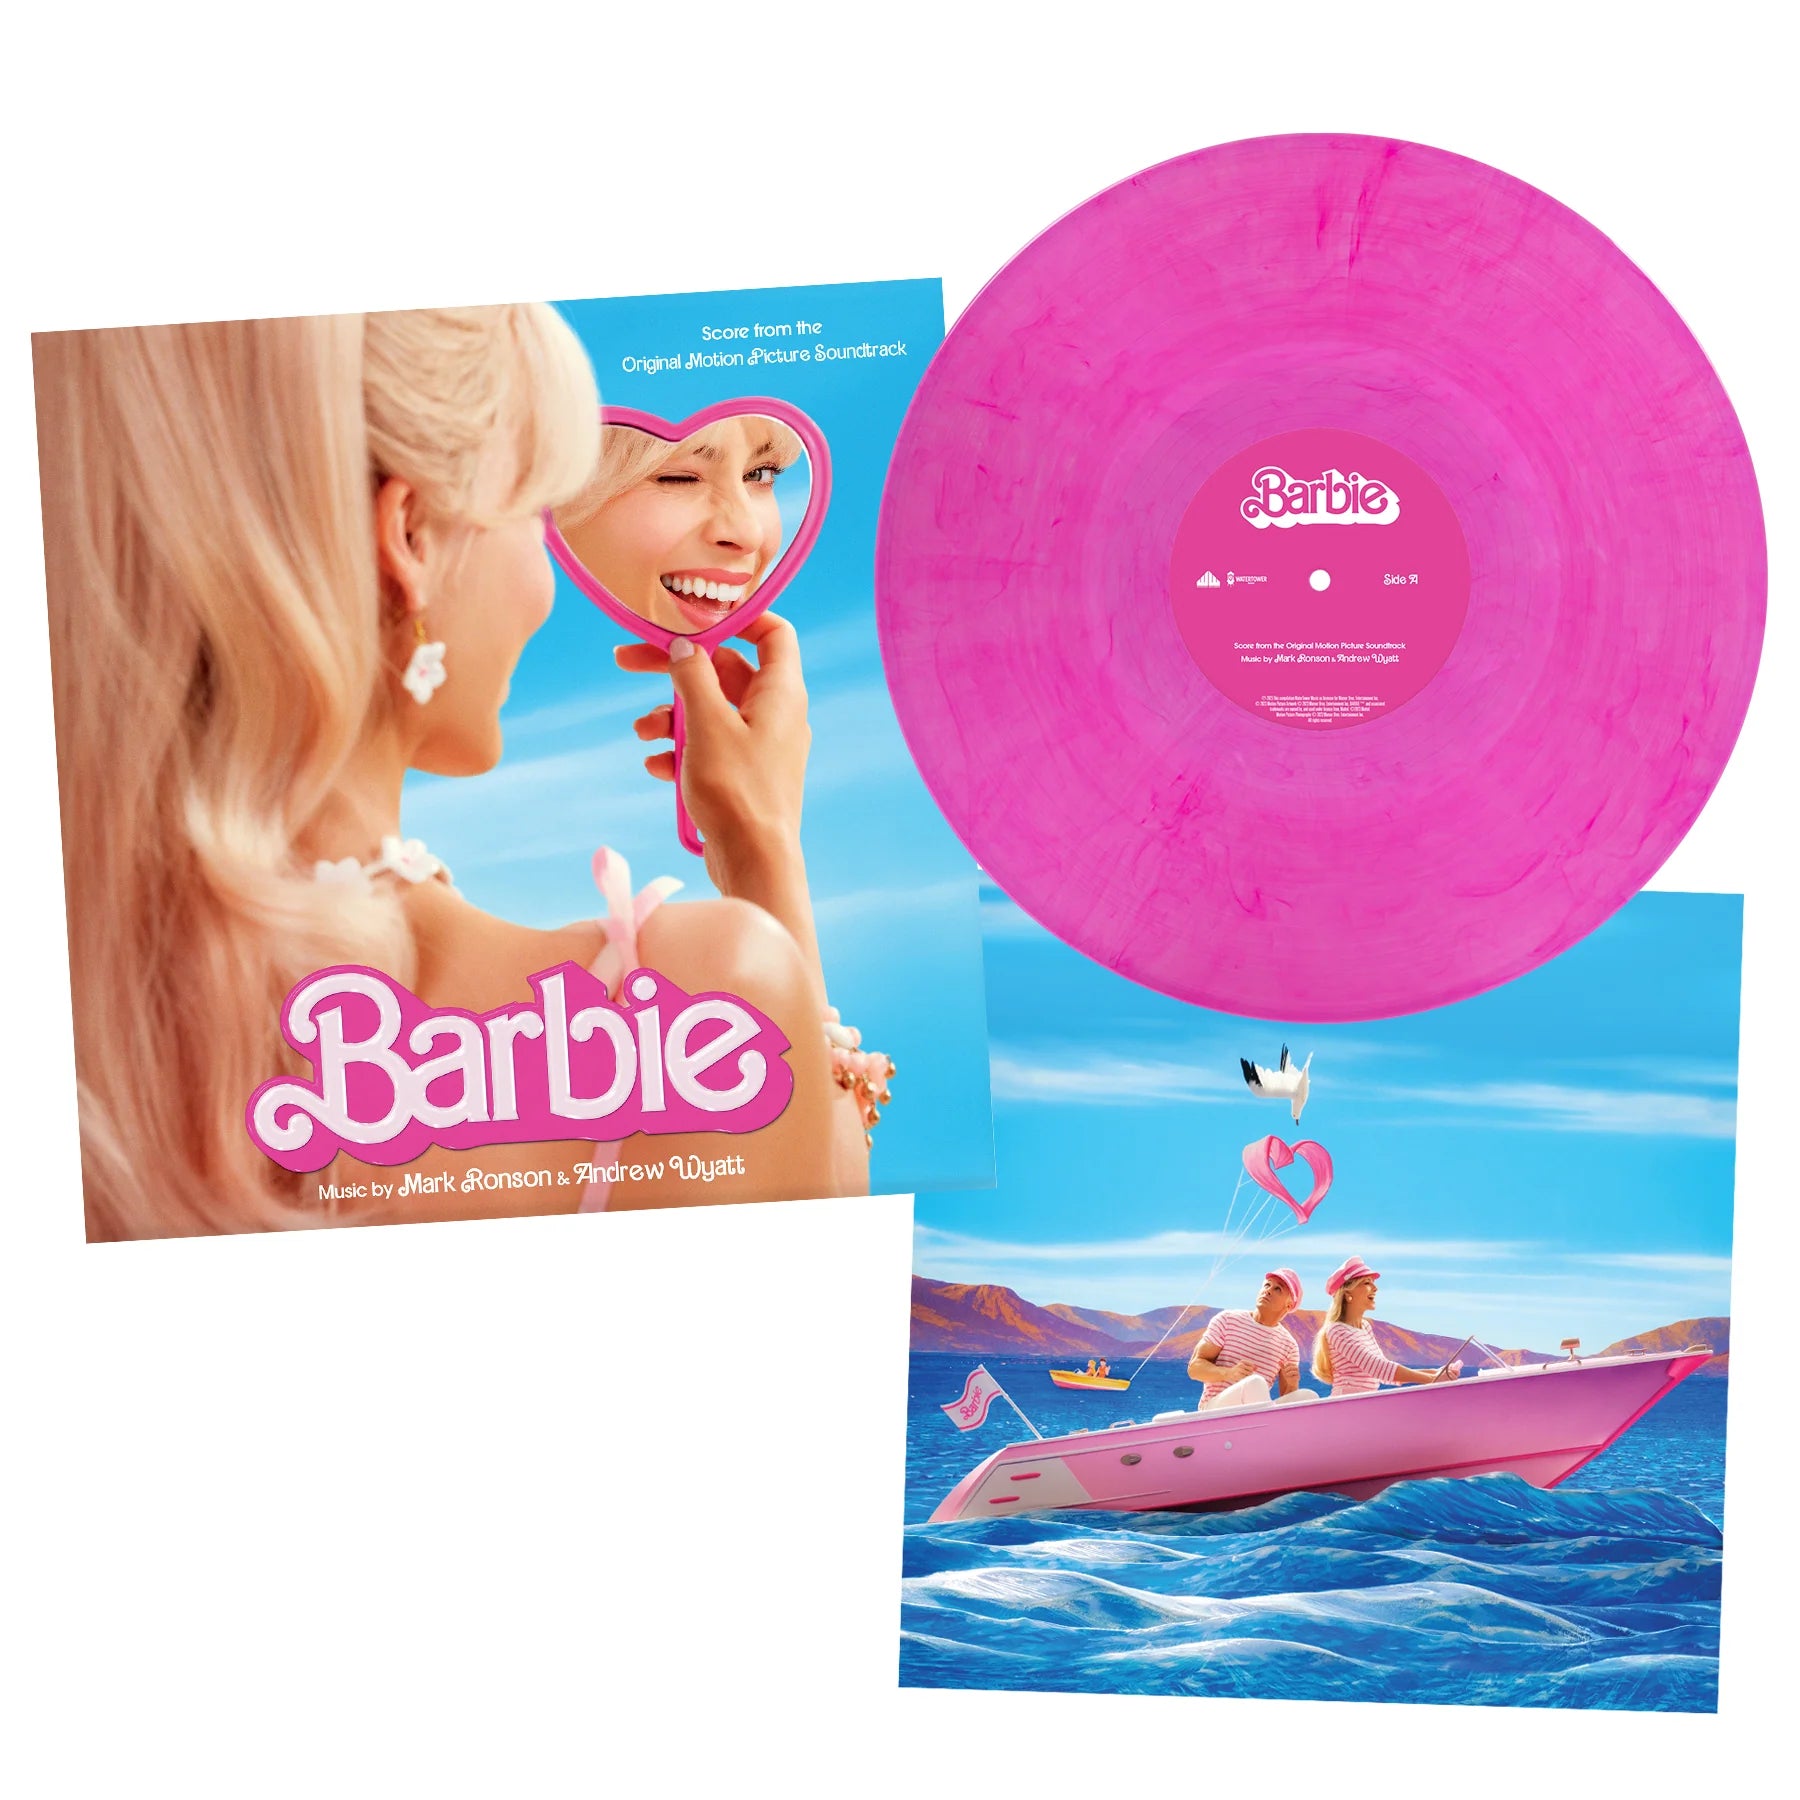 Mark Ronson, Andrew Wyatt - Barbie - Score From The Original Motion Picture Soundtrack: Limited Neon Barbie Pink Vinyl LP